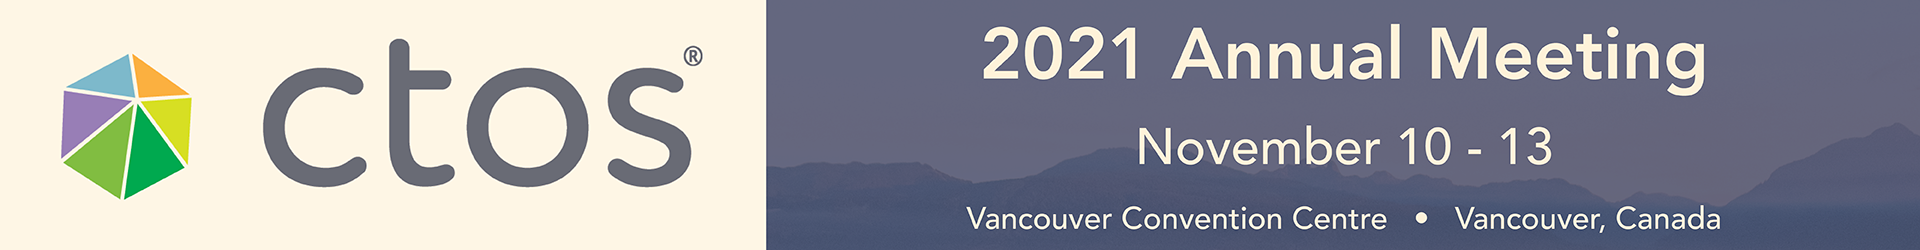 2021 CTOS Annual Meeting Event Banner